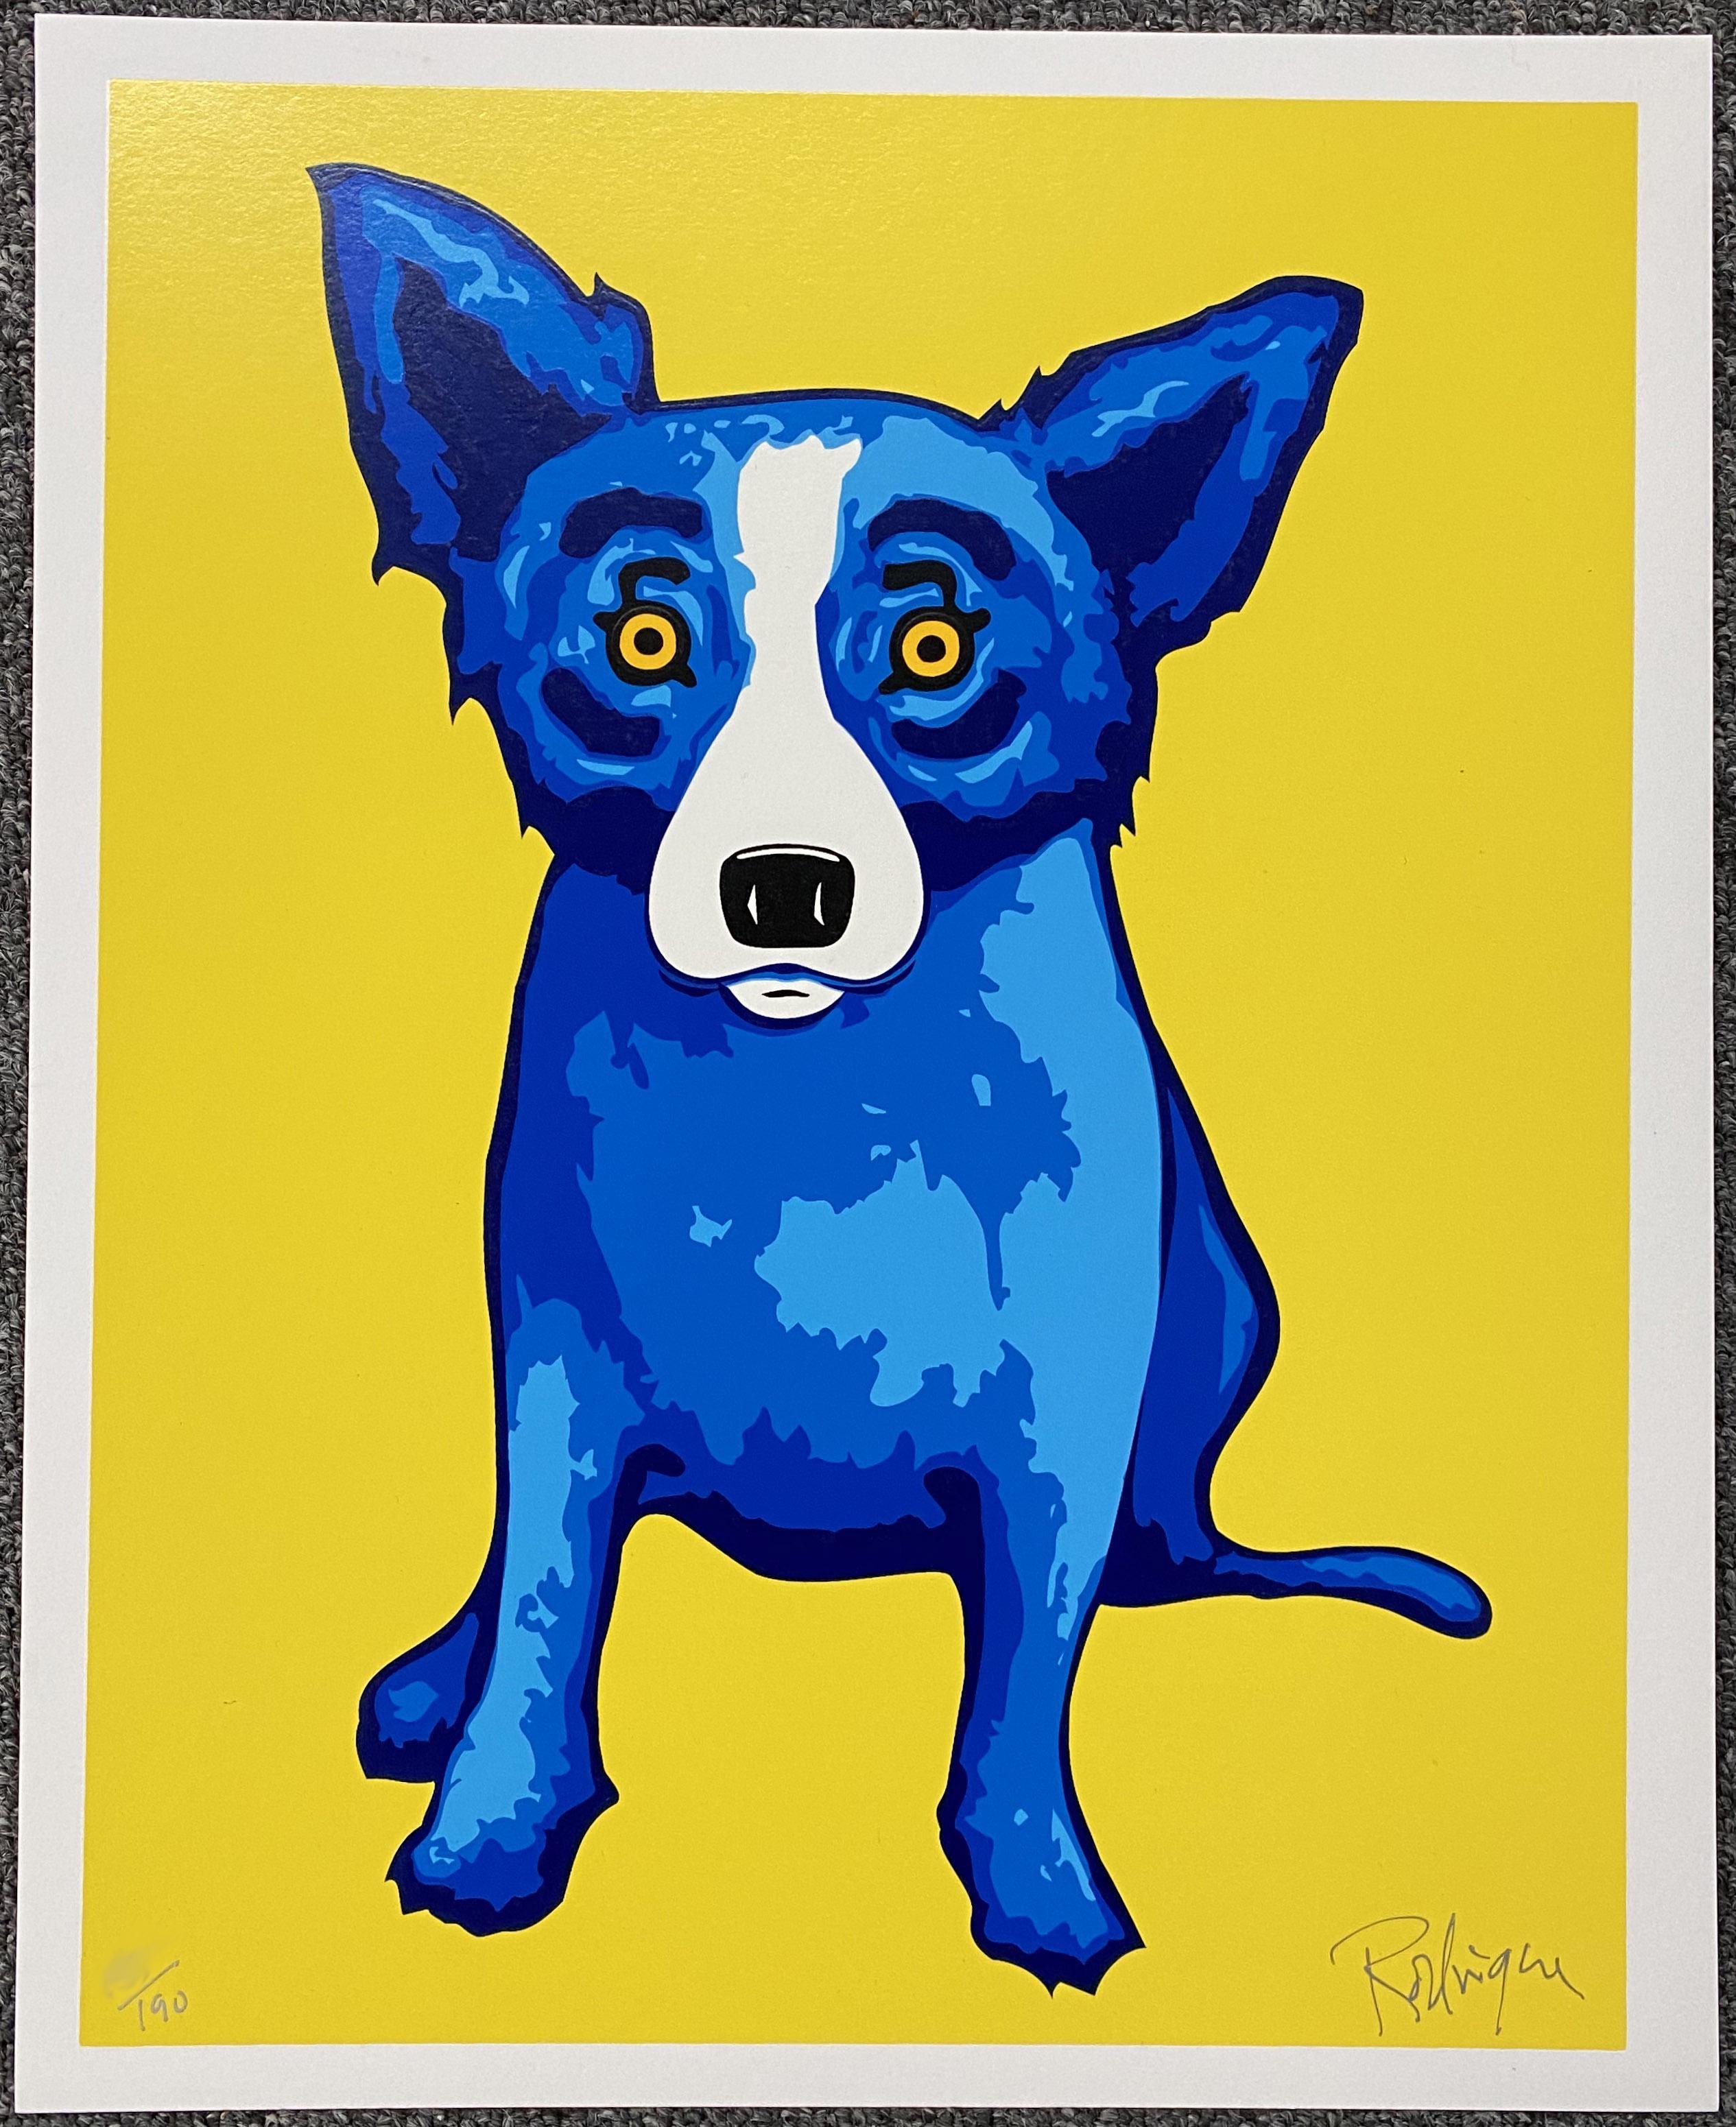 george rodrigue signed prints for sale